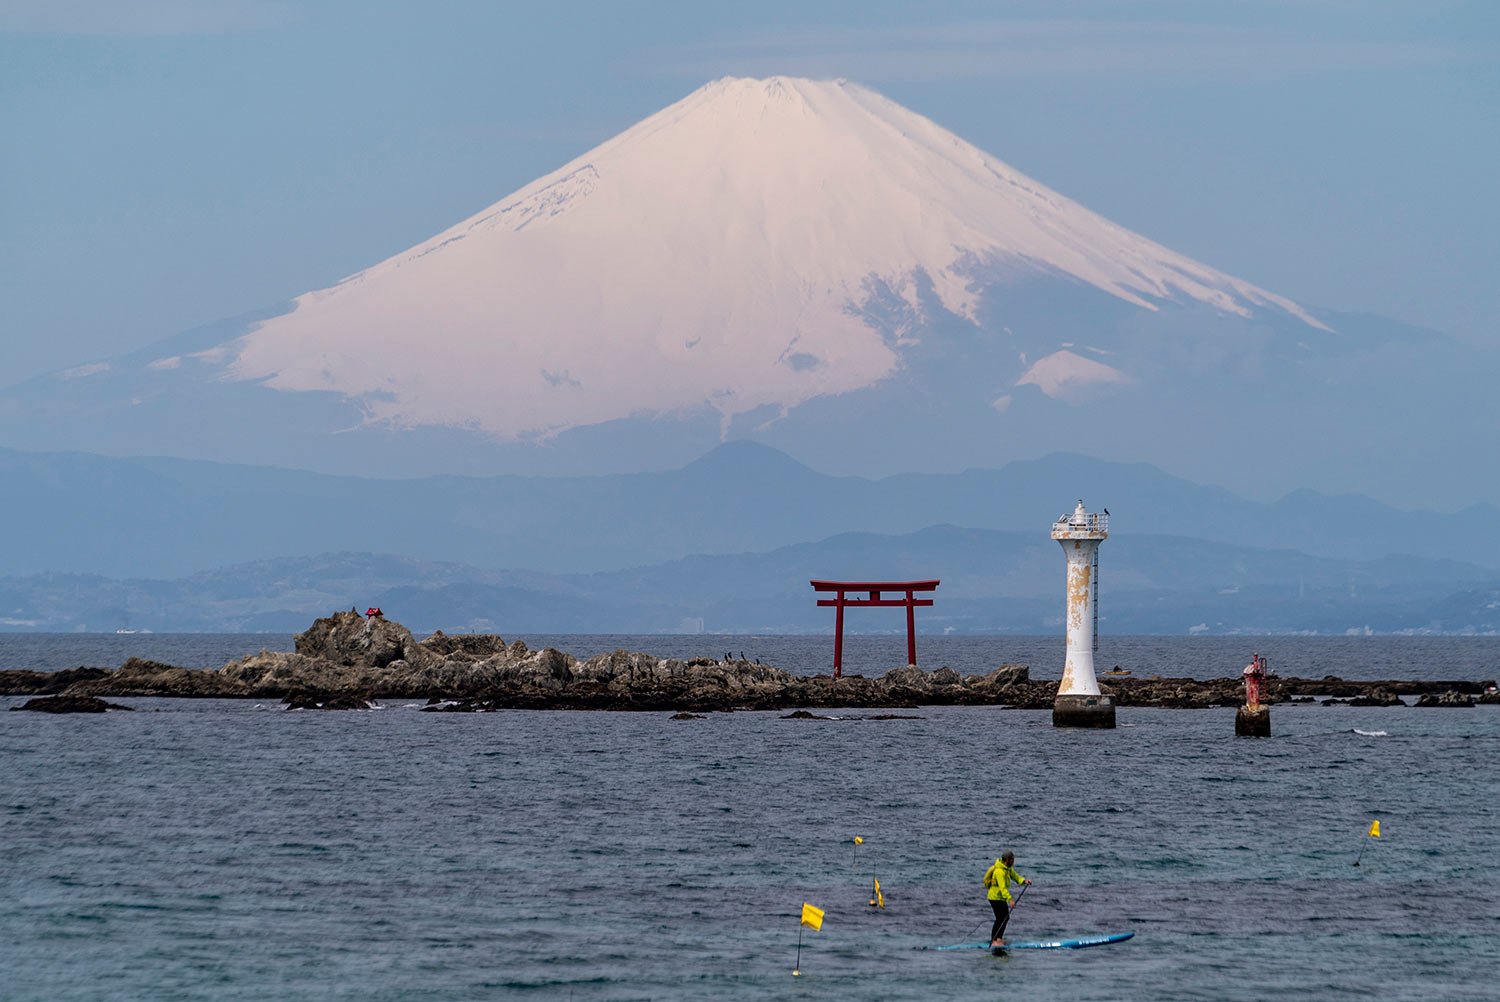  With Mount Fuji in the background, a standup paddleboarder cruises near a Torii gate, an entrance gate to a Shinto shrine, in Sagami Bay Wednesday, April 6, 2022, in Zushi, south of Tokyo. (AP Photo/Kiichiro Sato) 